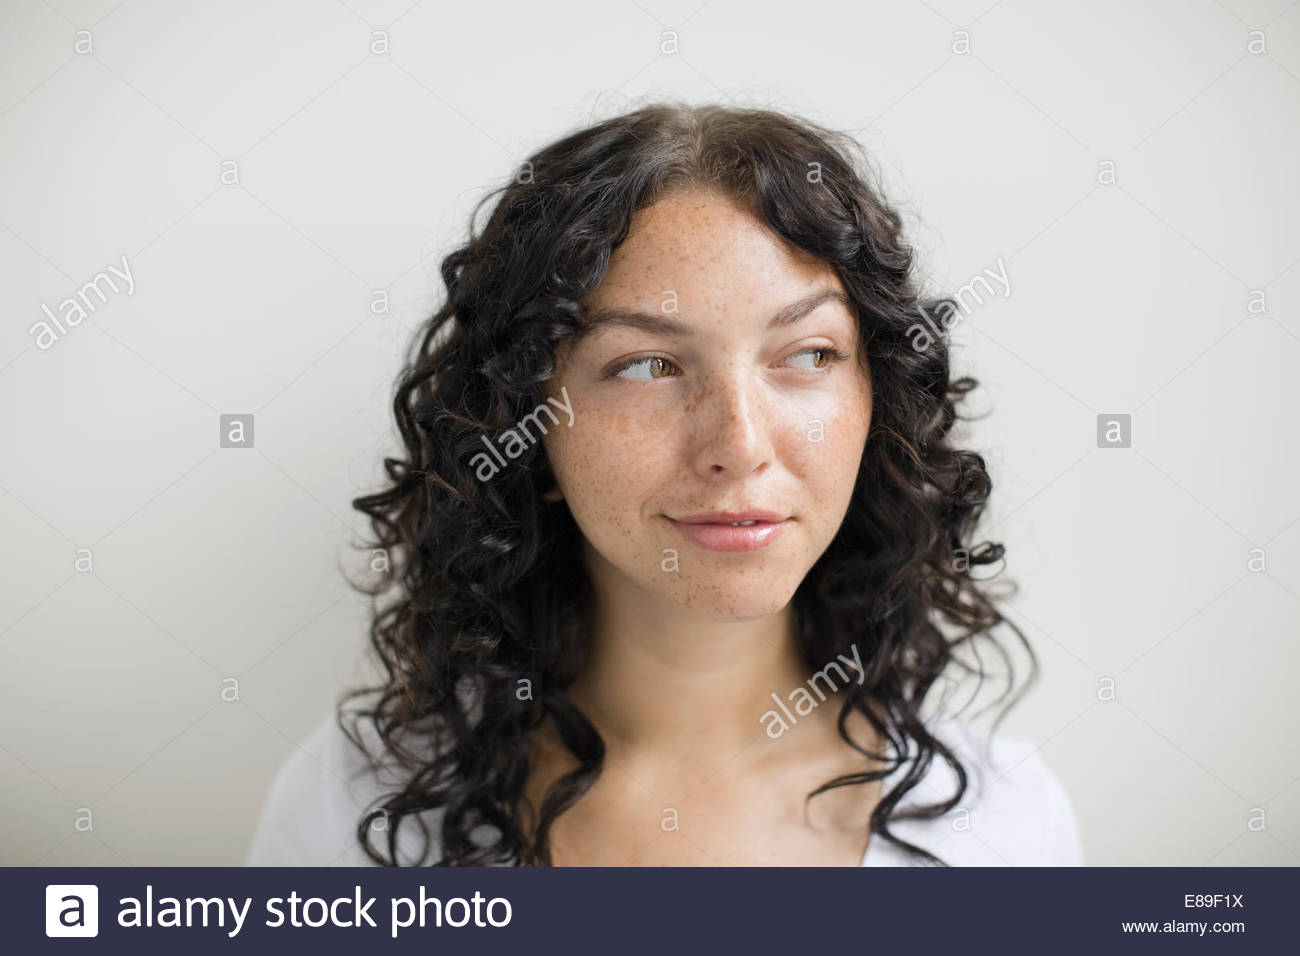 Pensive woman with freckles and curly black hair Stock Photo